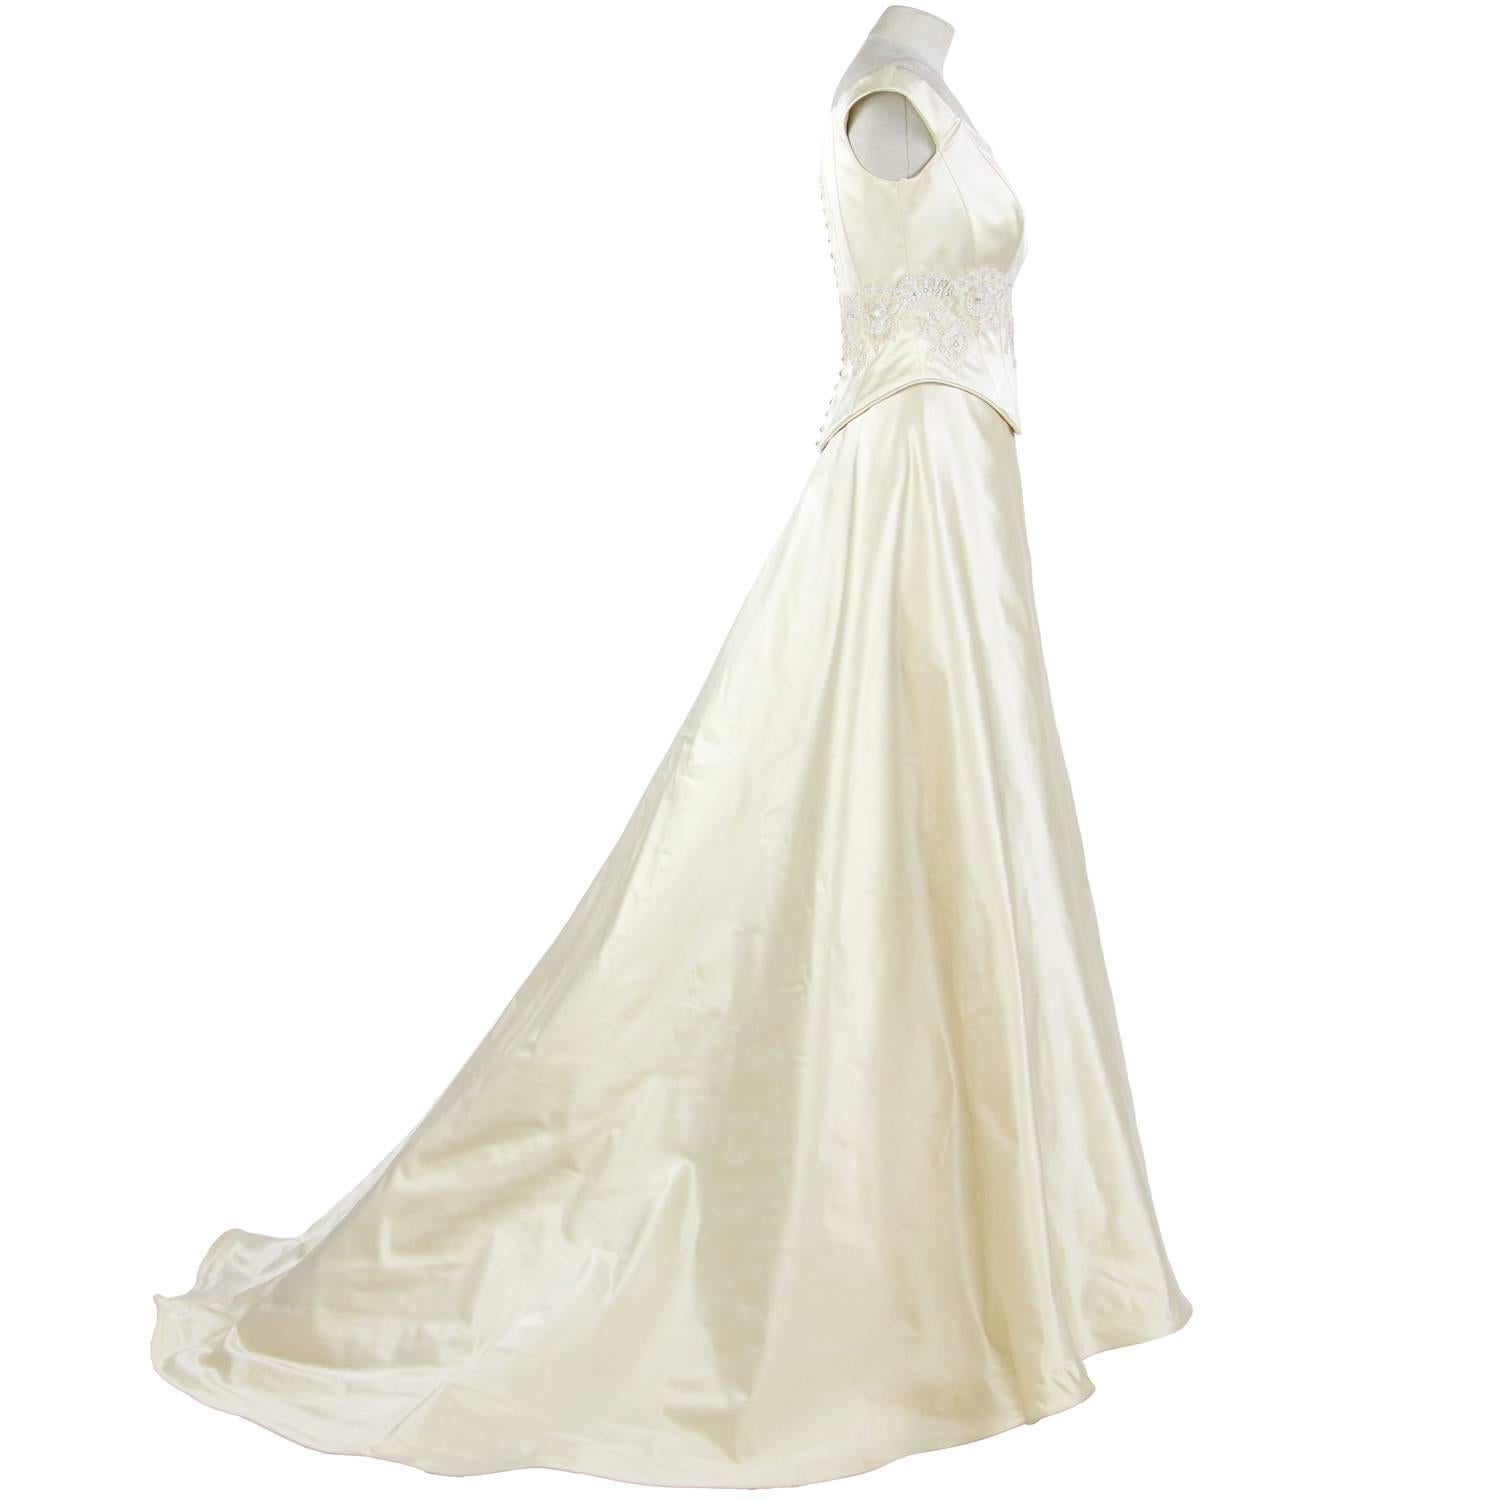 Marvelous princess dress by Atelier Aimée in ivory withe silk. It features two pieces, one off-the-shoulders neckline top with slats, decorated with lace, beads and sequins, and a wide skirt with layers of tulle veil, a petticoat and train. Zip and